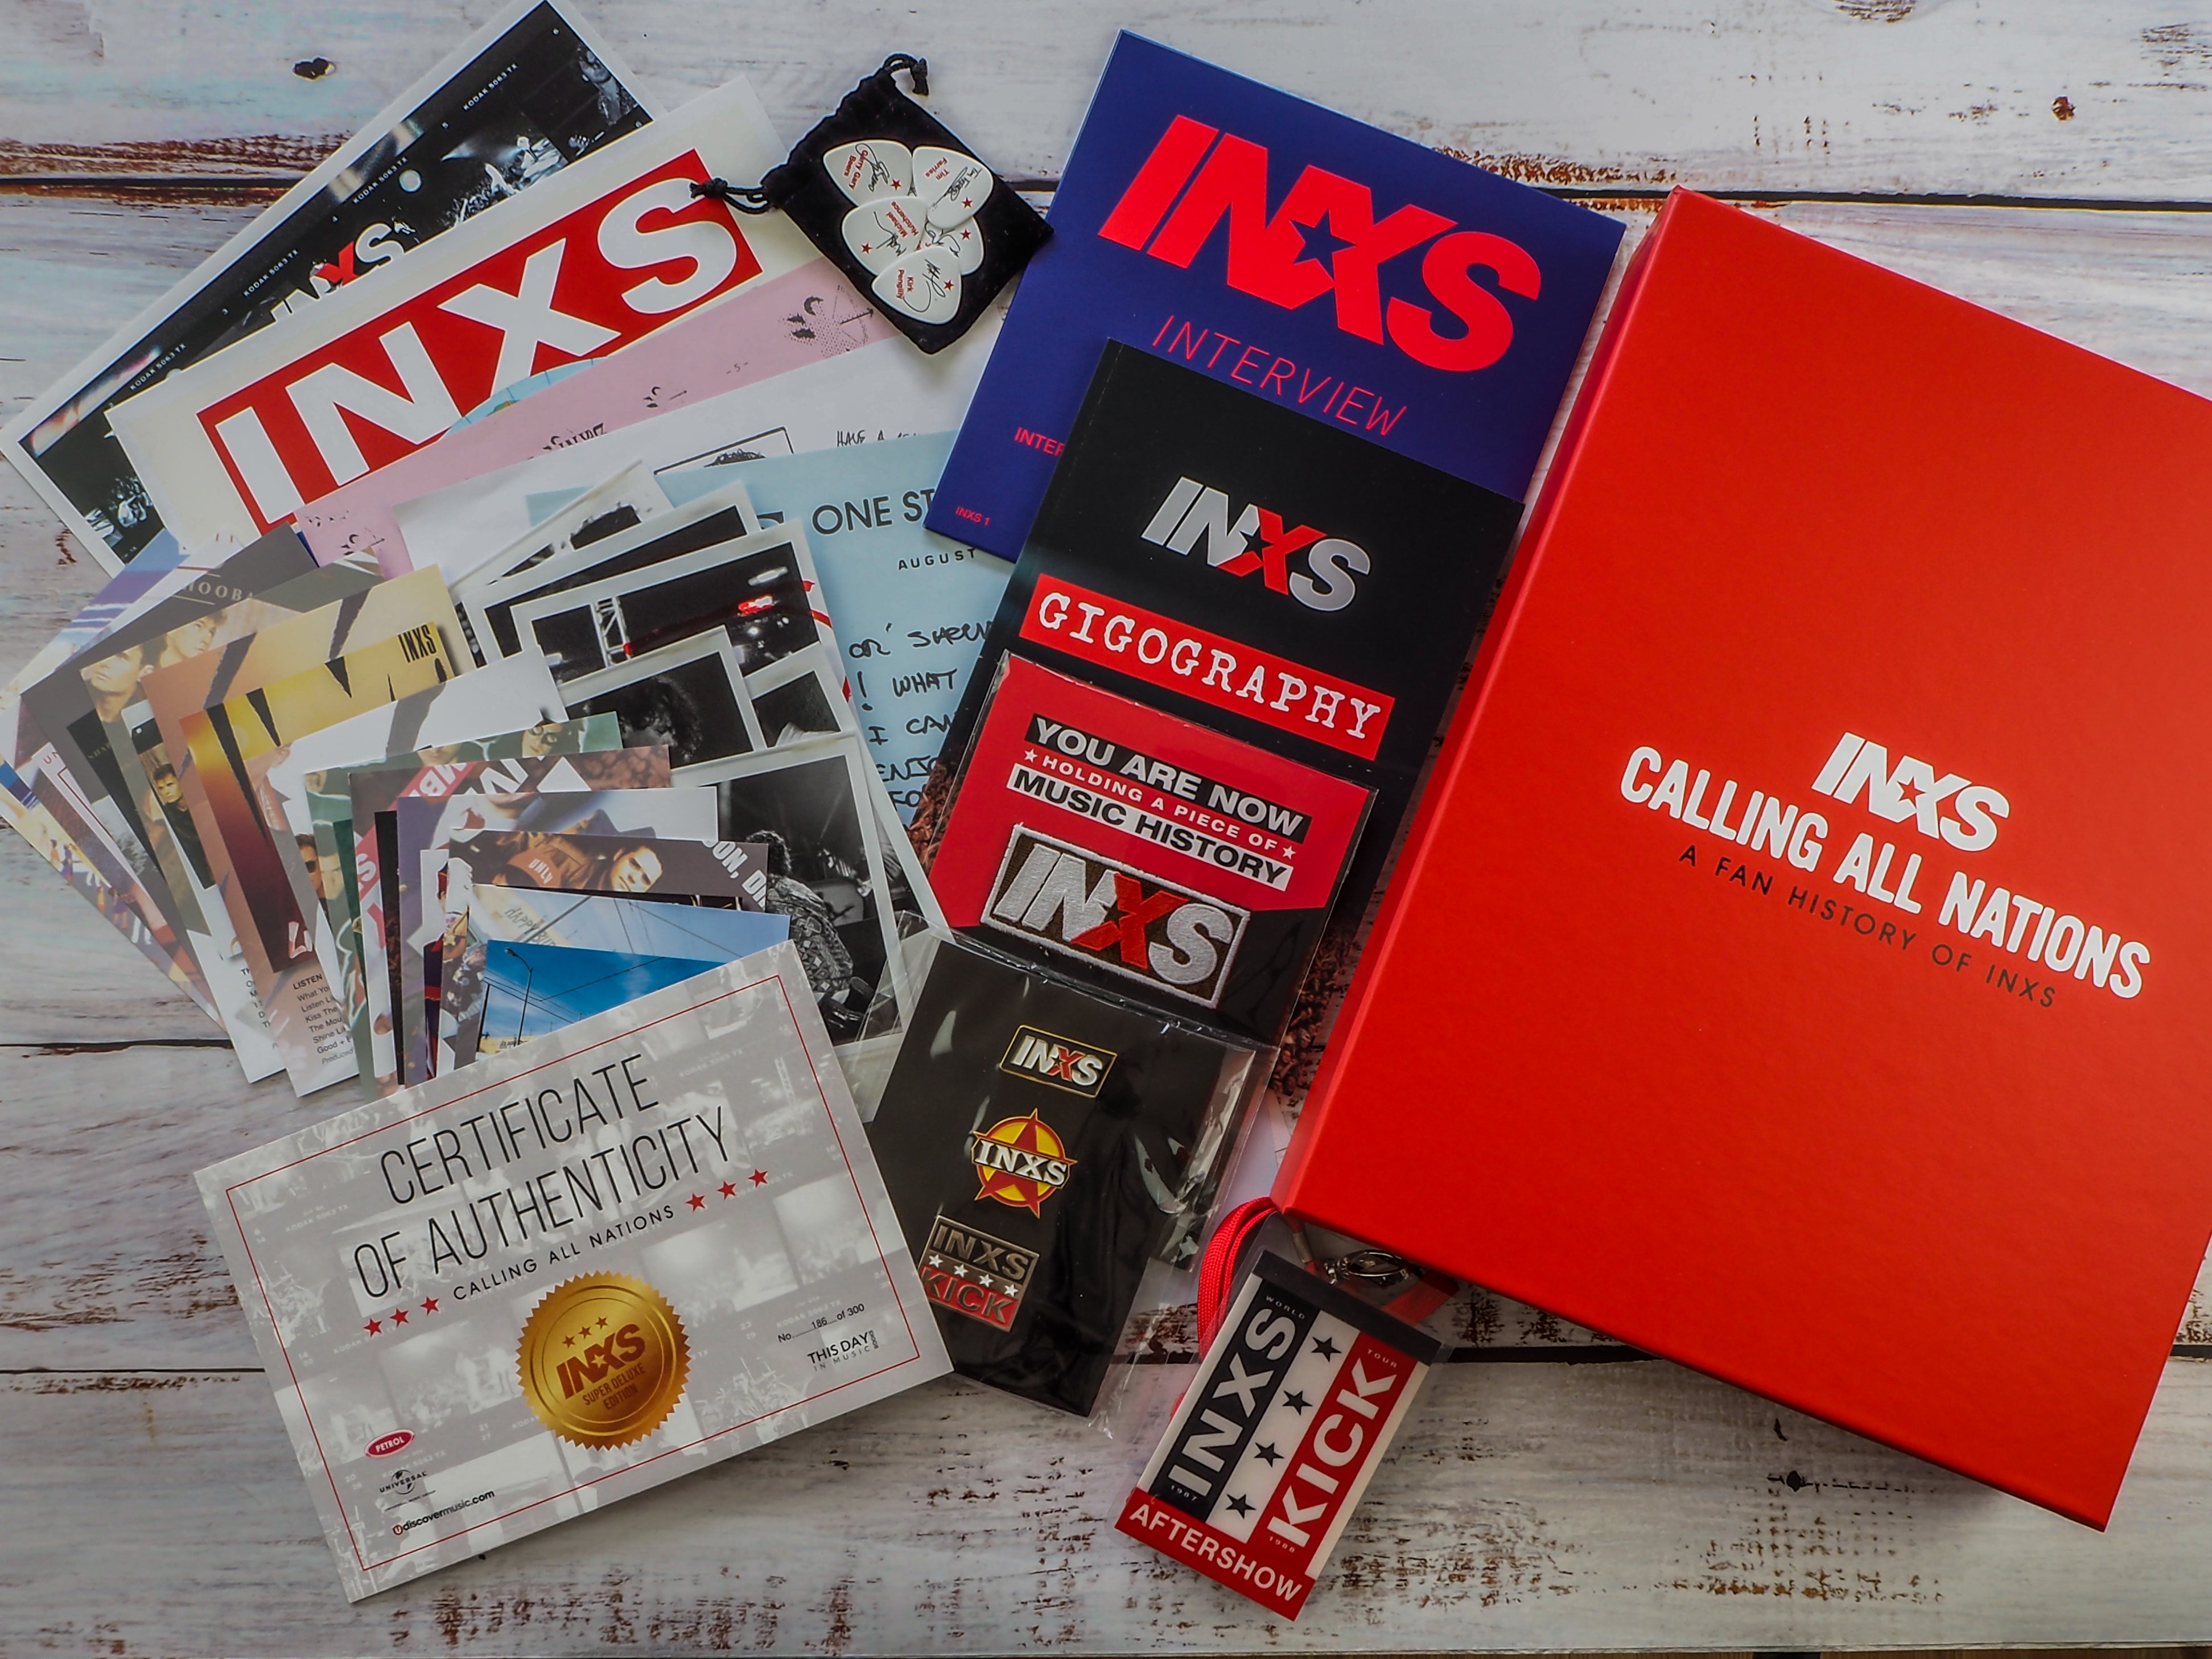 Calling All Nations: A Fan History of INXS (Deluxe Edition Book) Detail 3